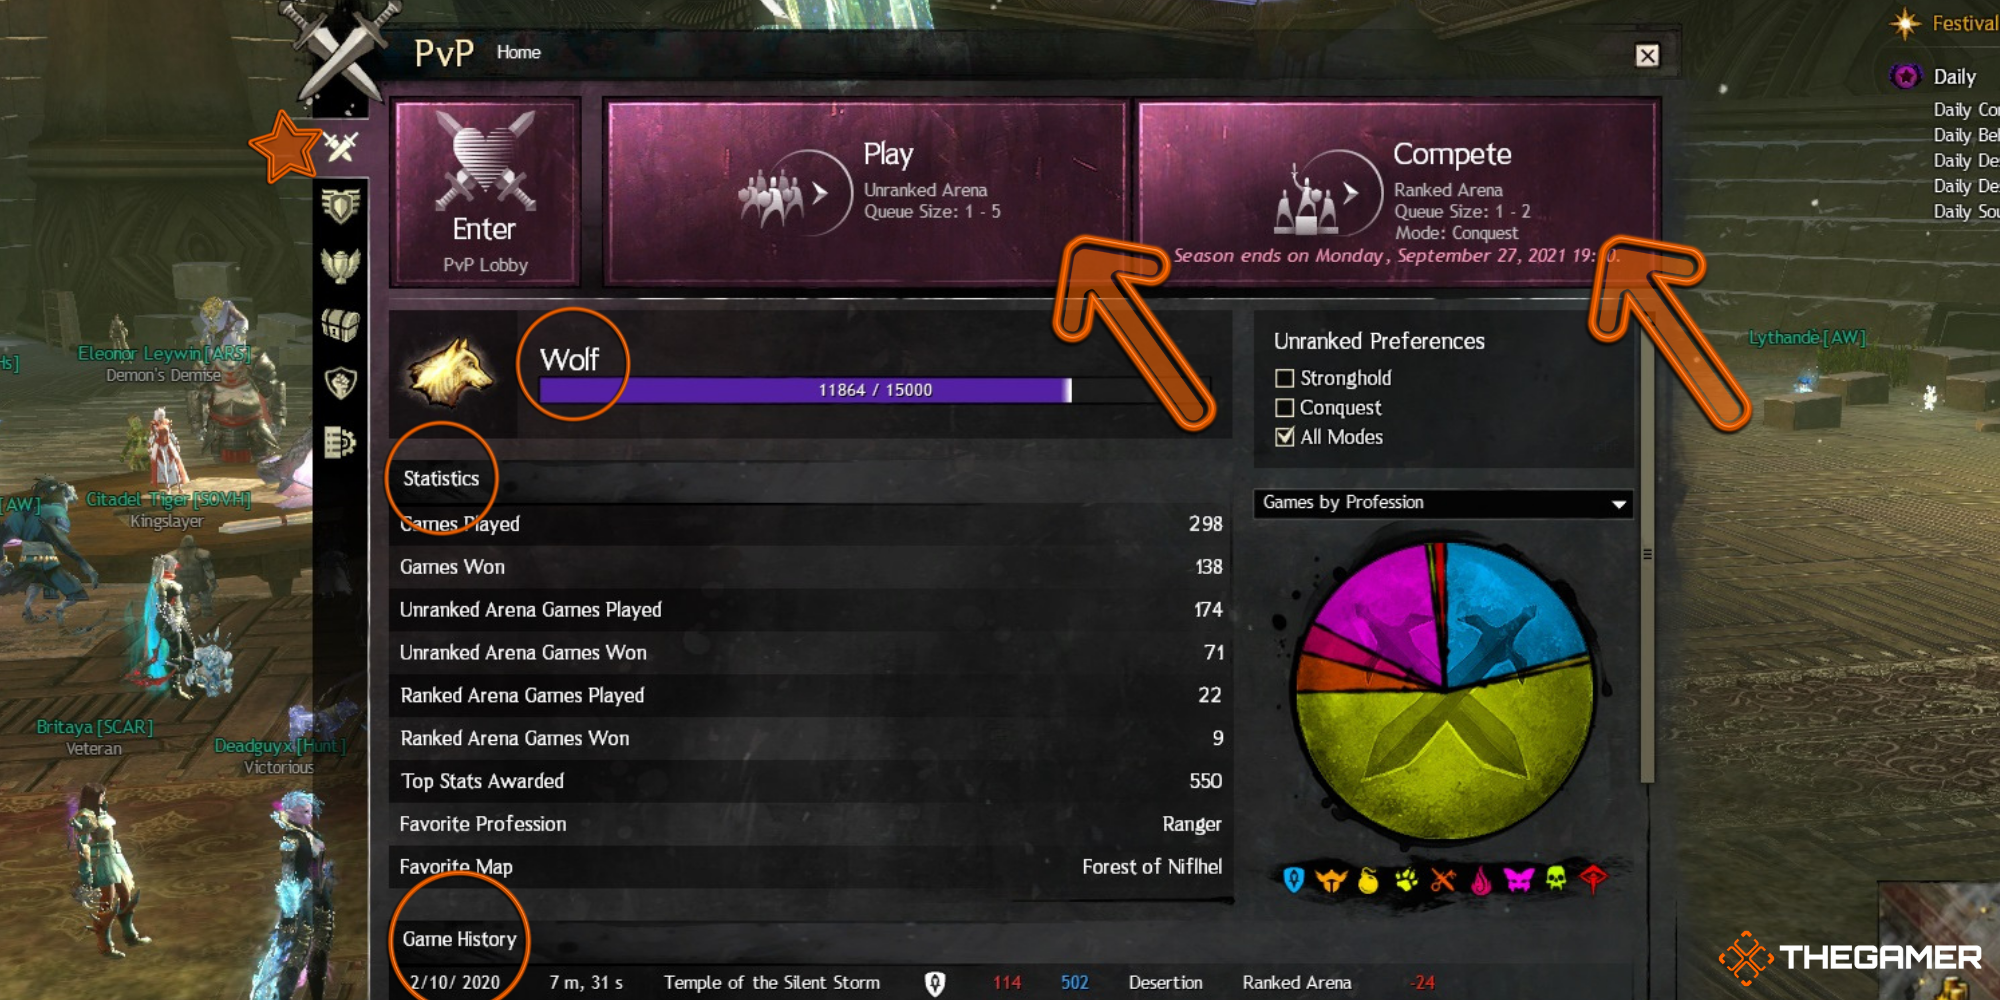 GW2 - Screenshot showing the player the details of the home tab on the PvP menu